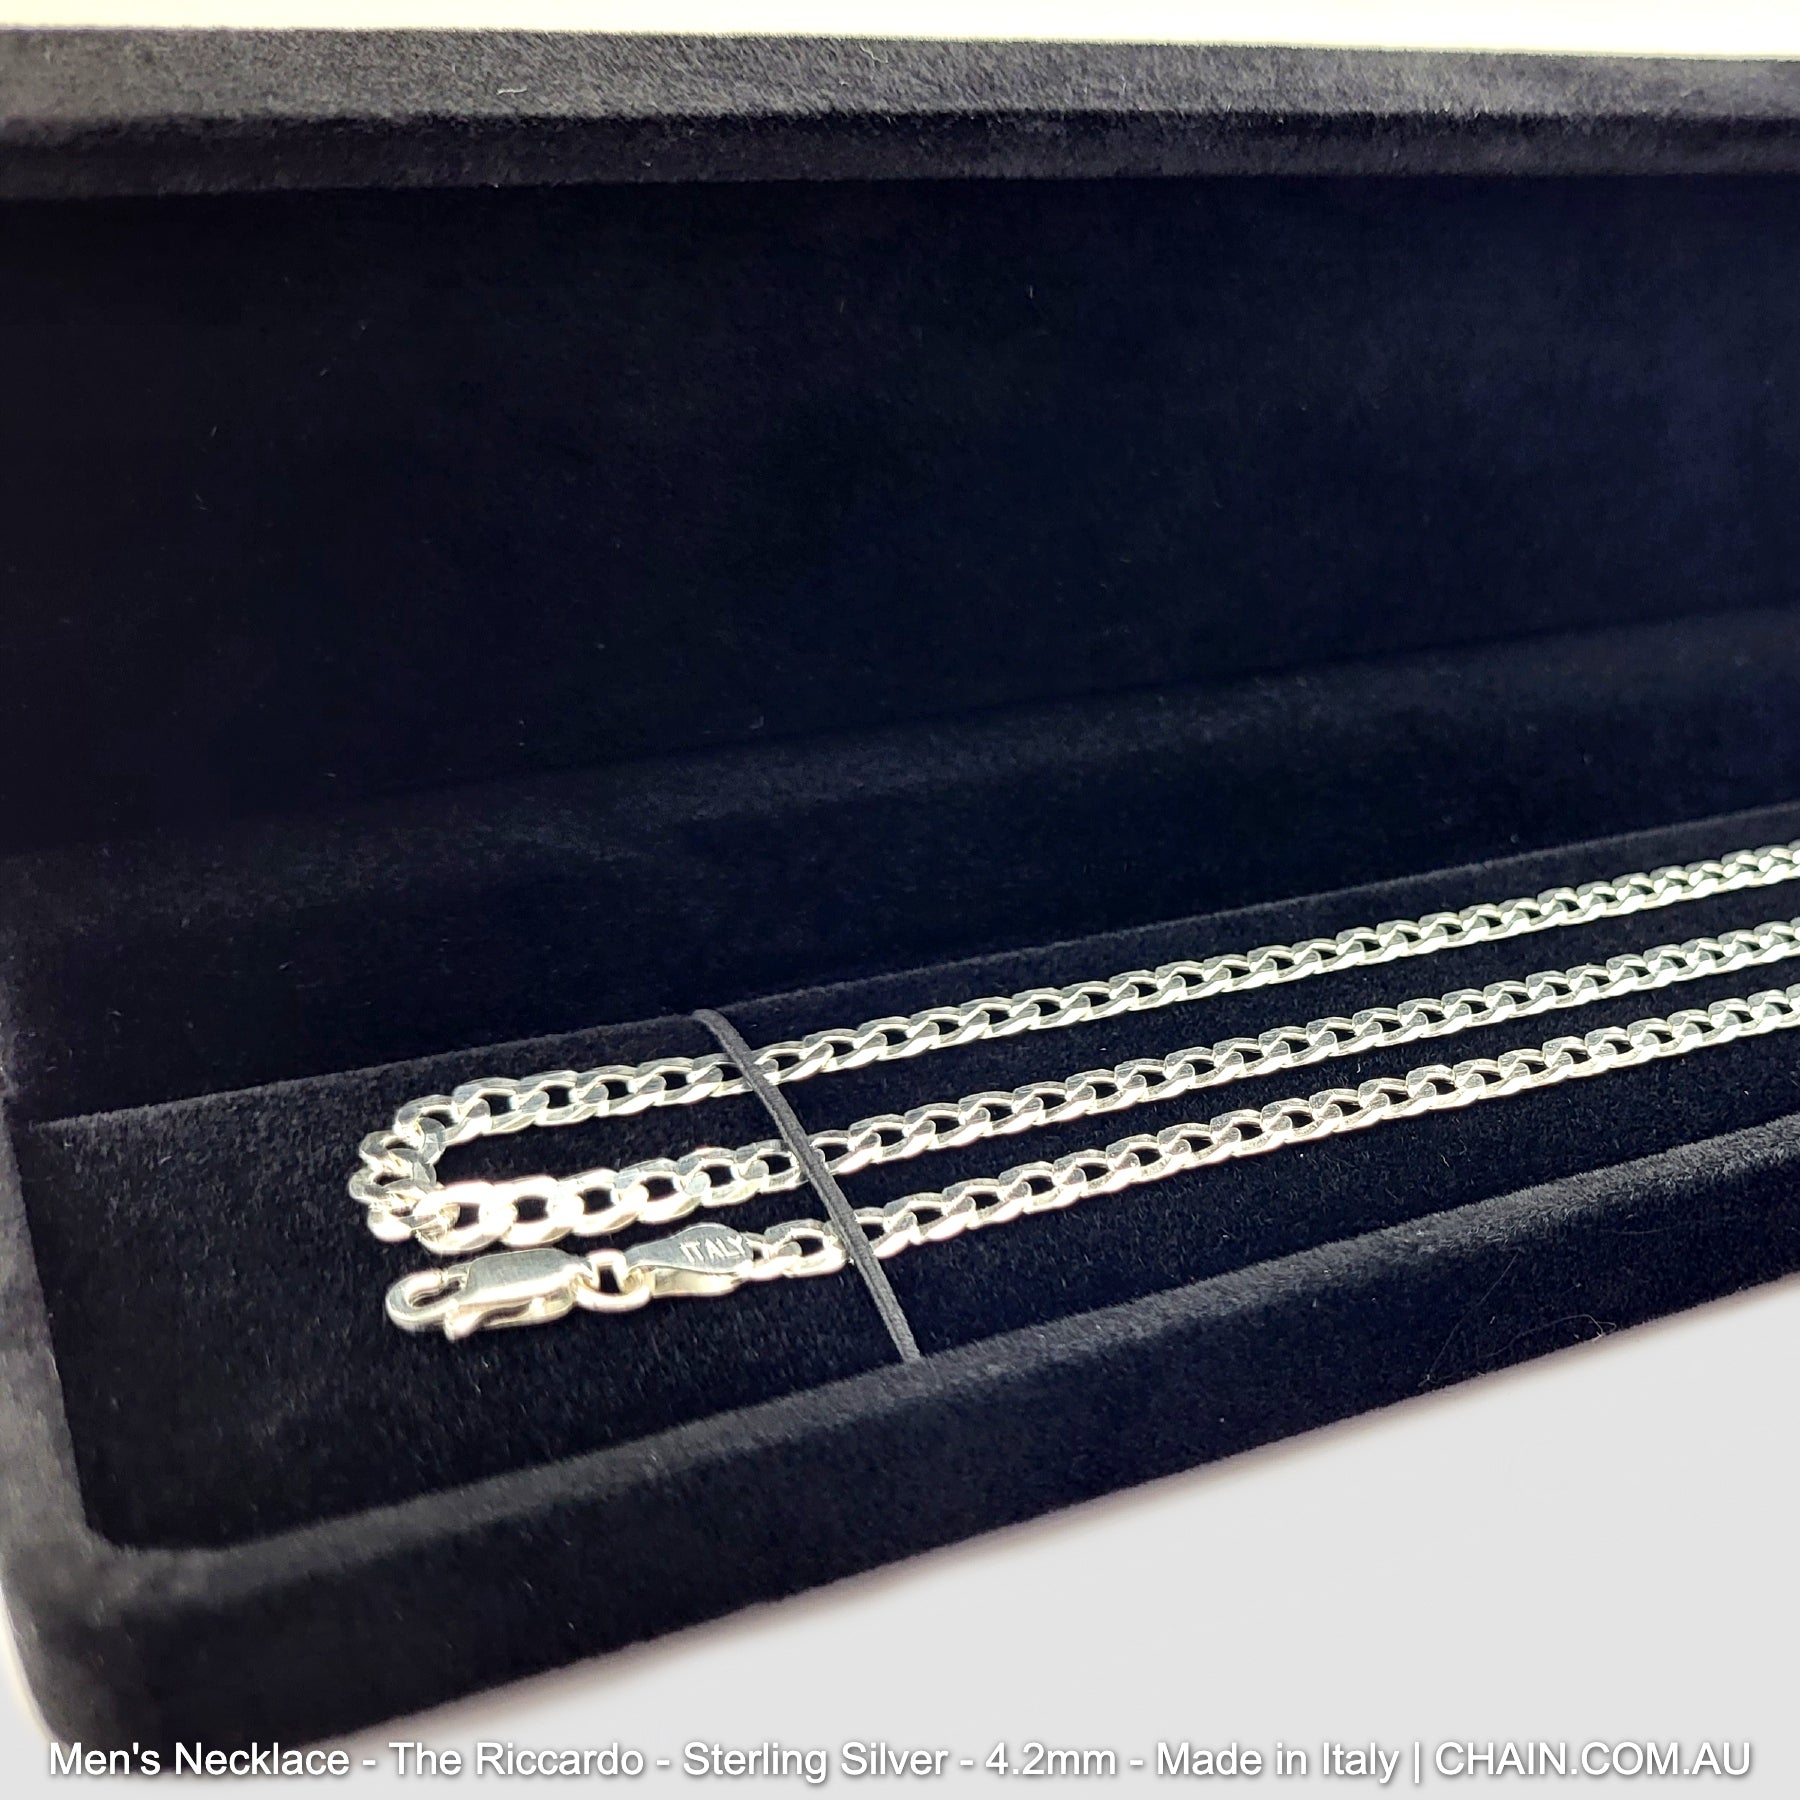 Men's Chain Necklace - The Riccardo - Sterling Silver - 4.2mm - Made in Italy. Australia wide shipping. Shop jewellery chain chain.com.au